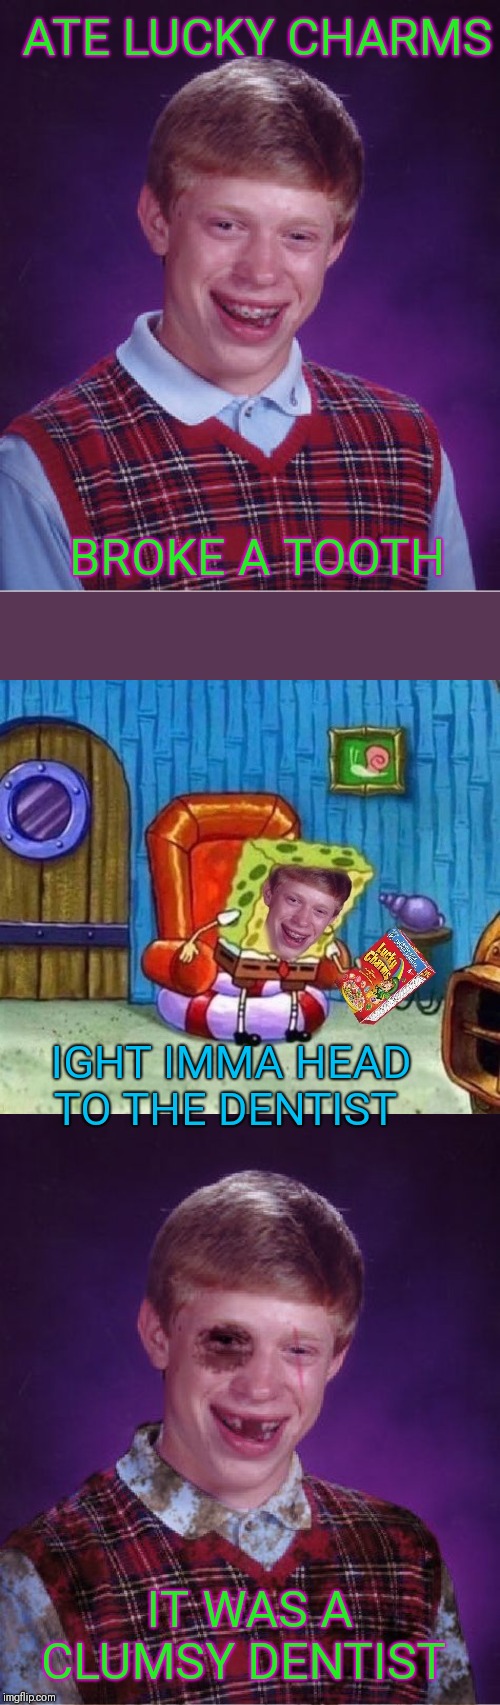 They're Magically Destructive... ;) | ATE LUCKY CHARMS; BROKE A TOOTH; IGHT IMMA HEAD TO THE DENTIST; IT WAS A CLUMSY DENTIST | image tagged in memes,bad luck brian,beat-up bad luck brian,lucky charms,44colt,dentist | made w/ Imgflip meme maker